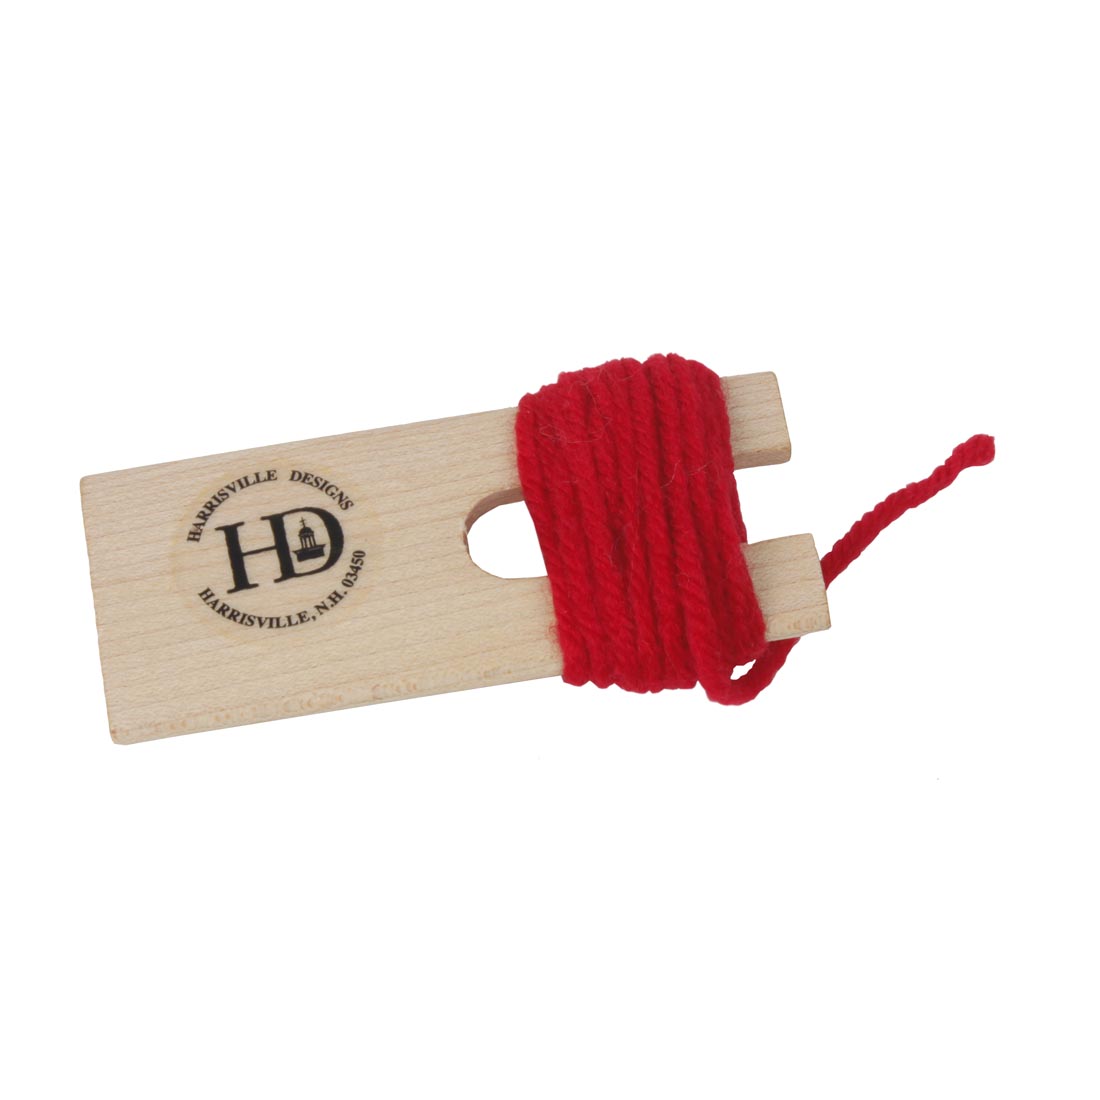 Harrisville Designs Pompom Maker in use with red yarn